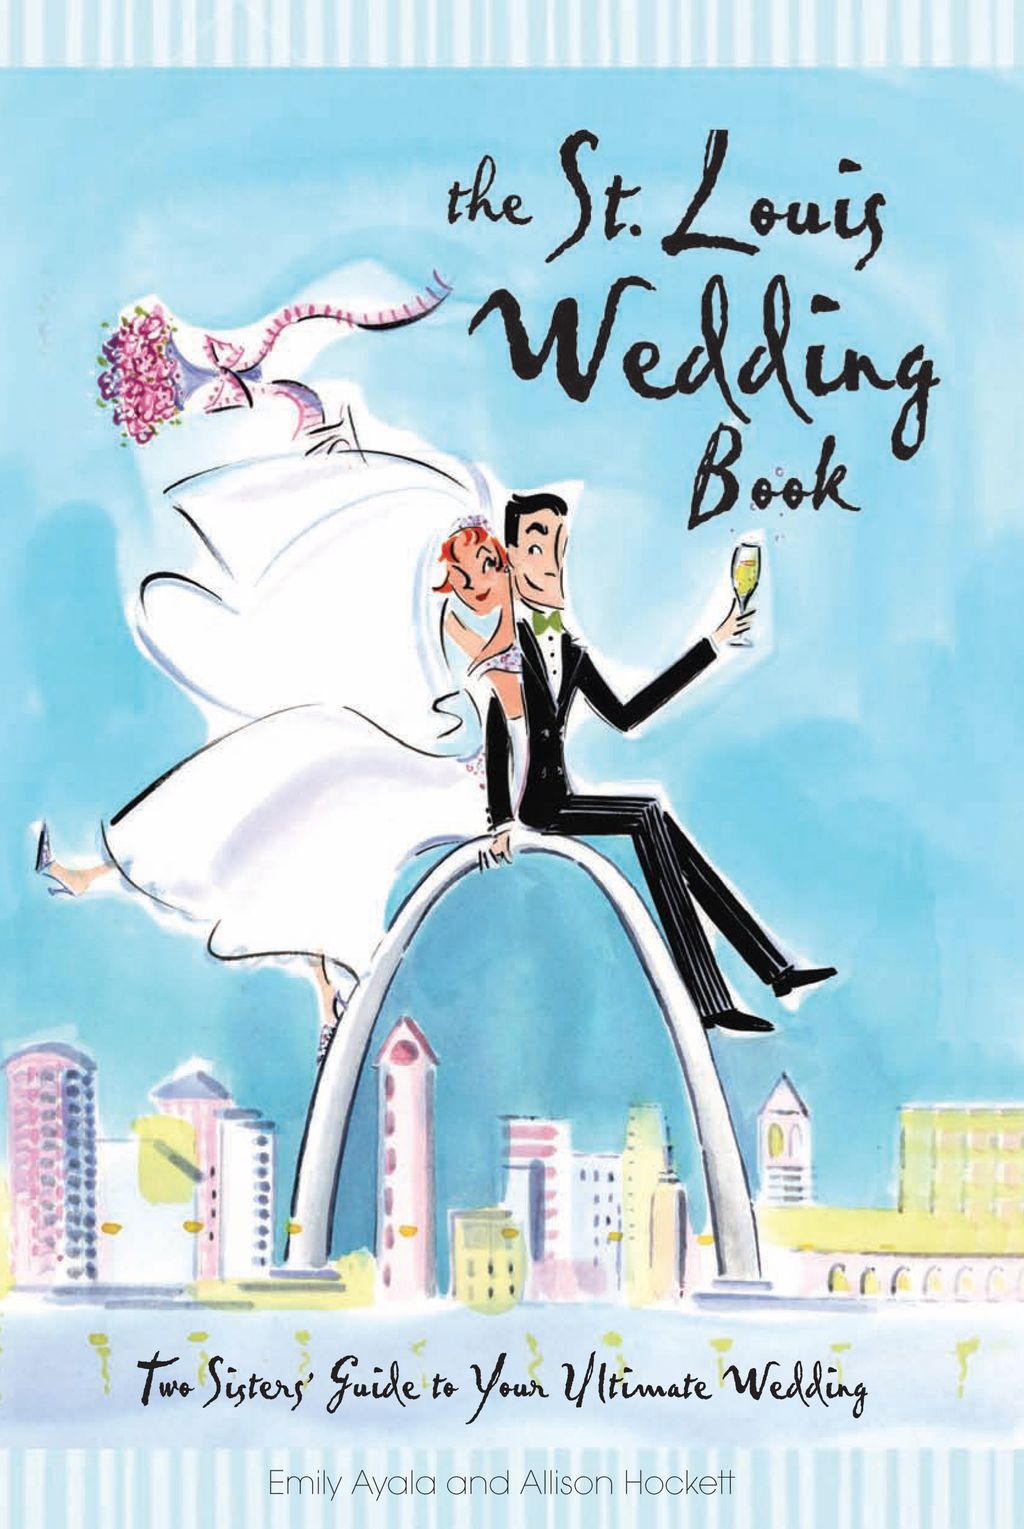 The St. Louis Wedding Book